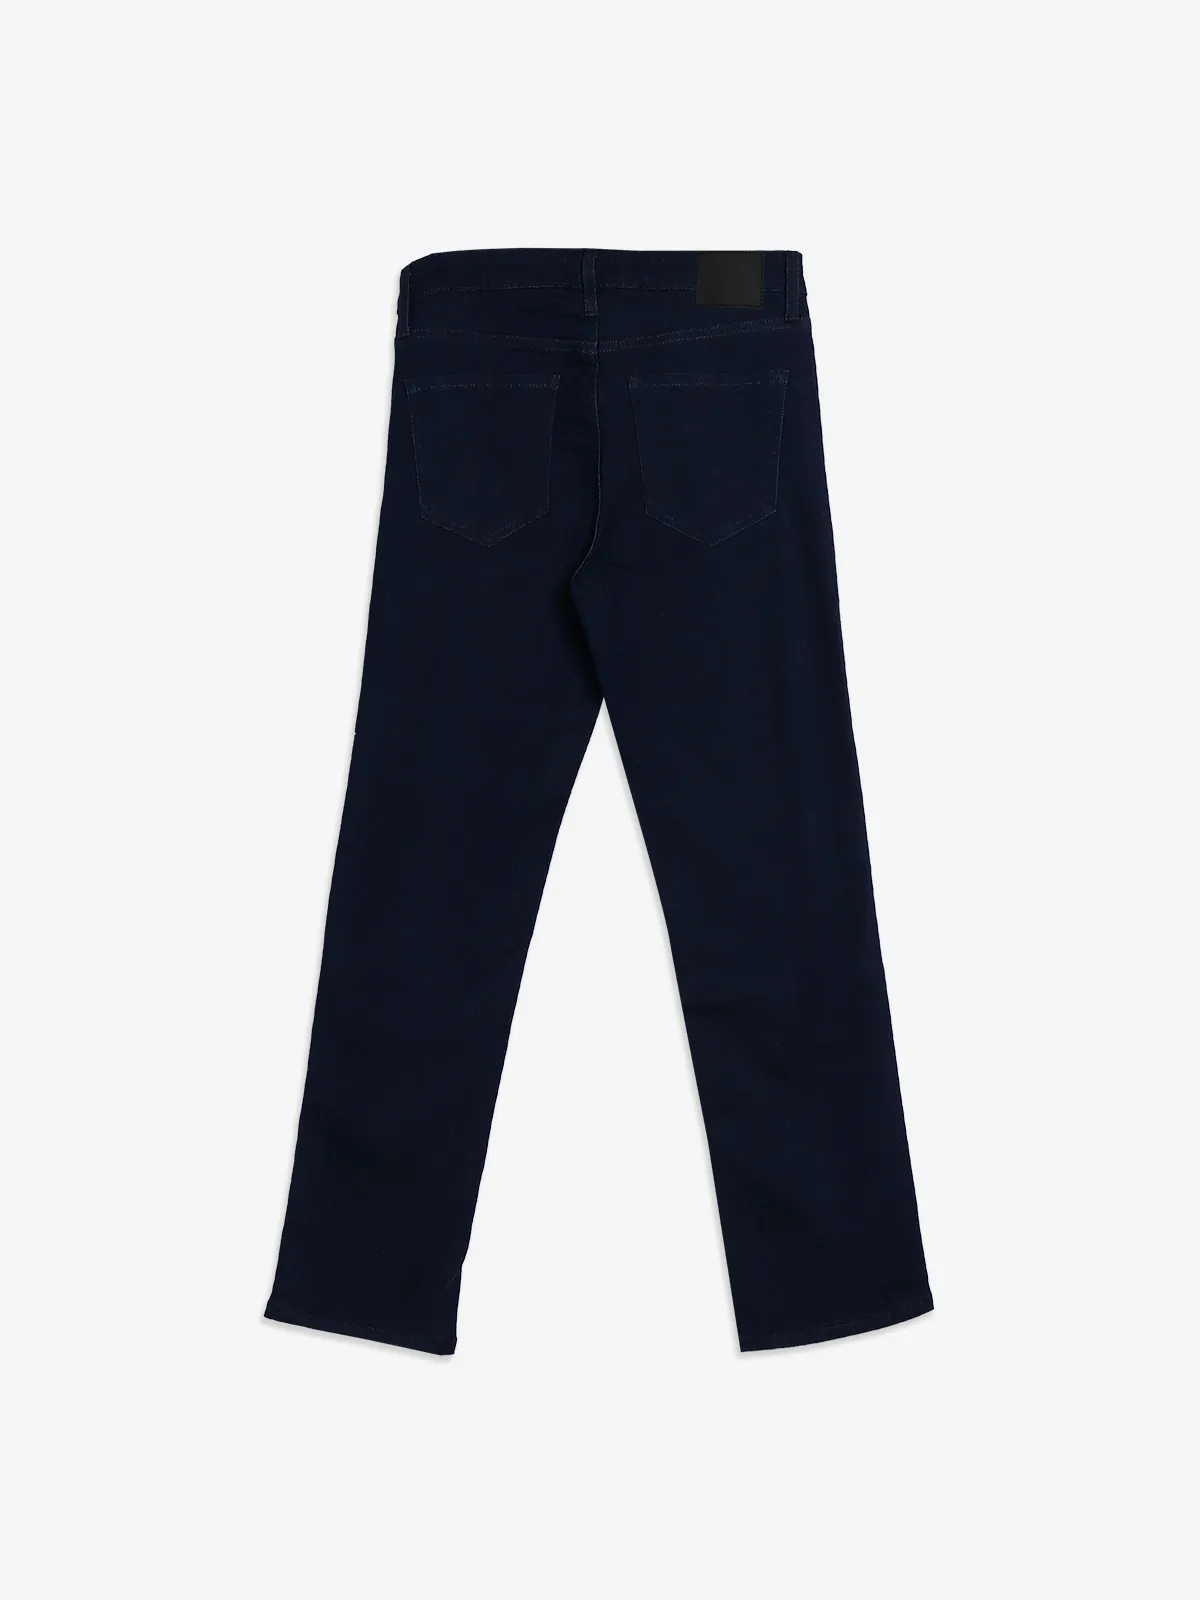 SPYKAR navy solid straight ankle length jeans